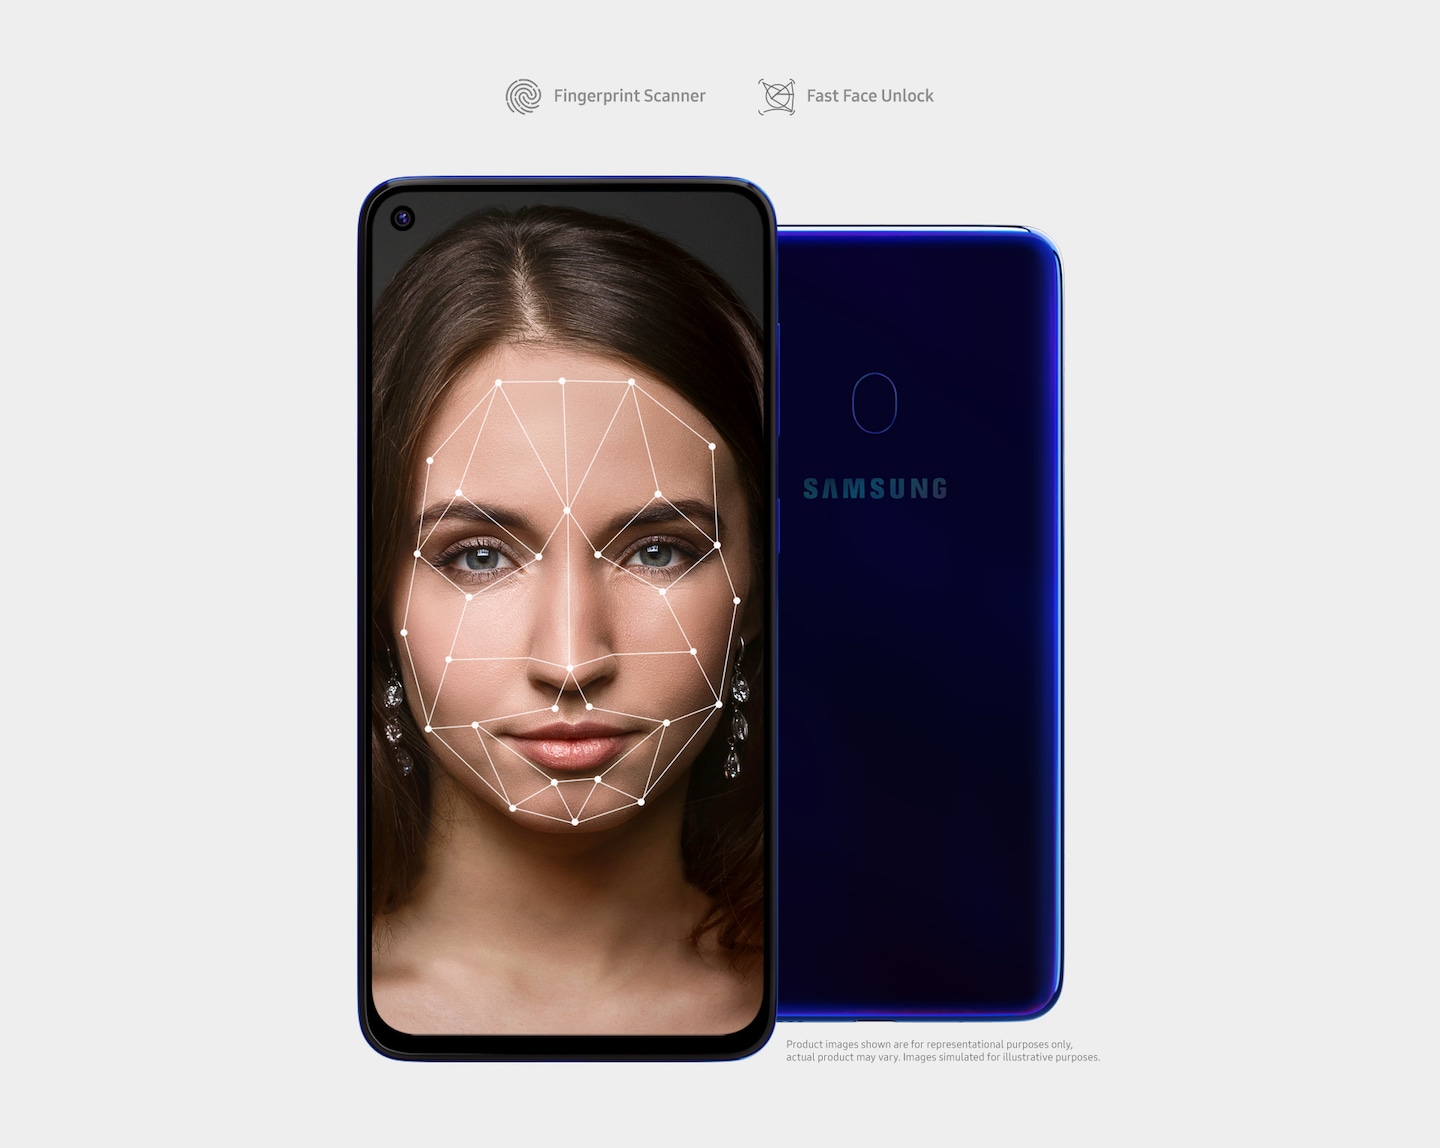 Galaxy M40 with Fast Face Unlock and a Finger Print Sensor